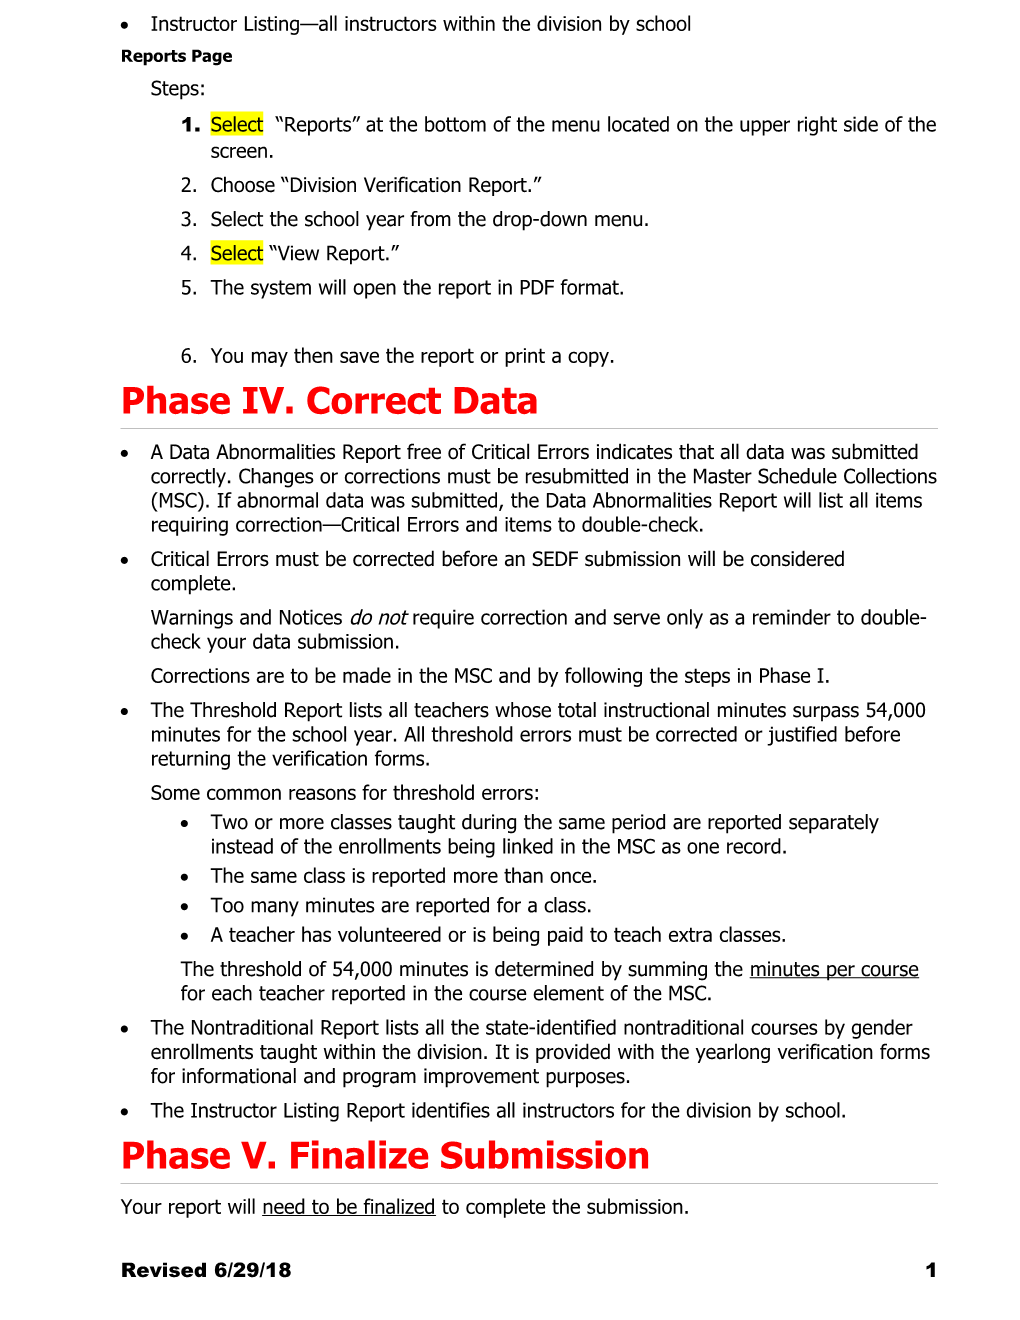 Revised Pages 11 & 12 CTERS User S Manual